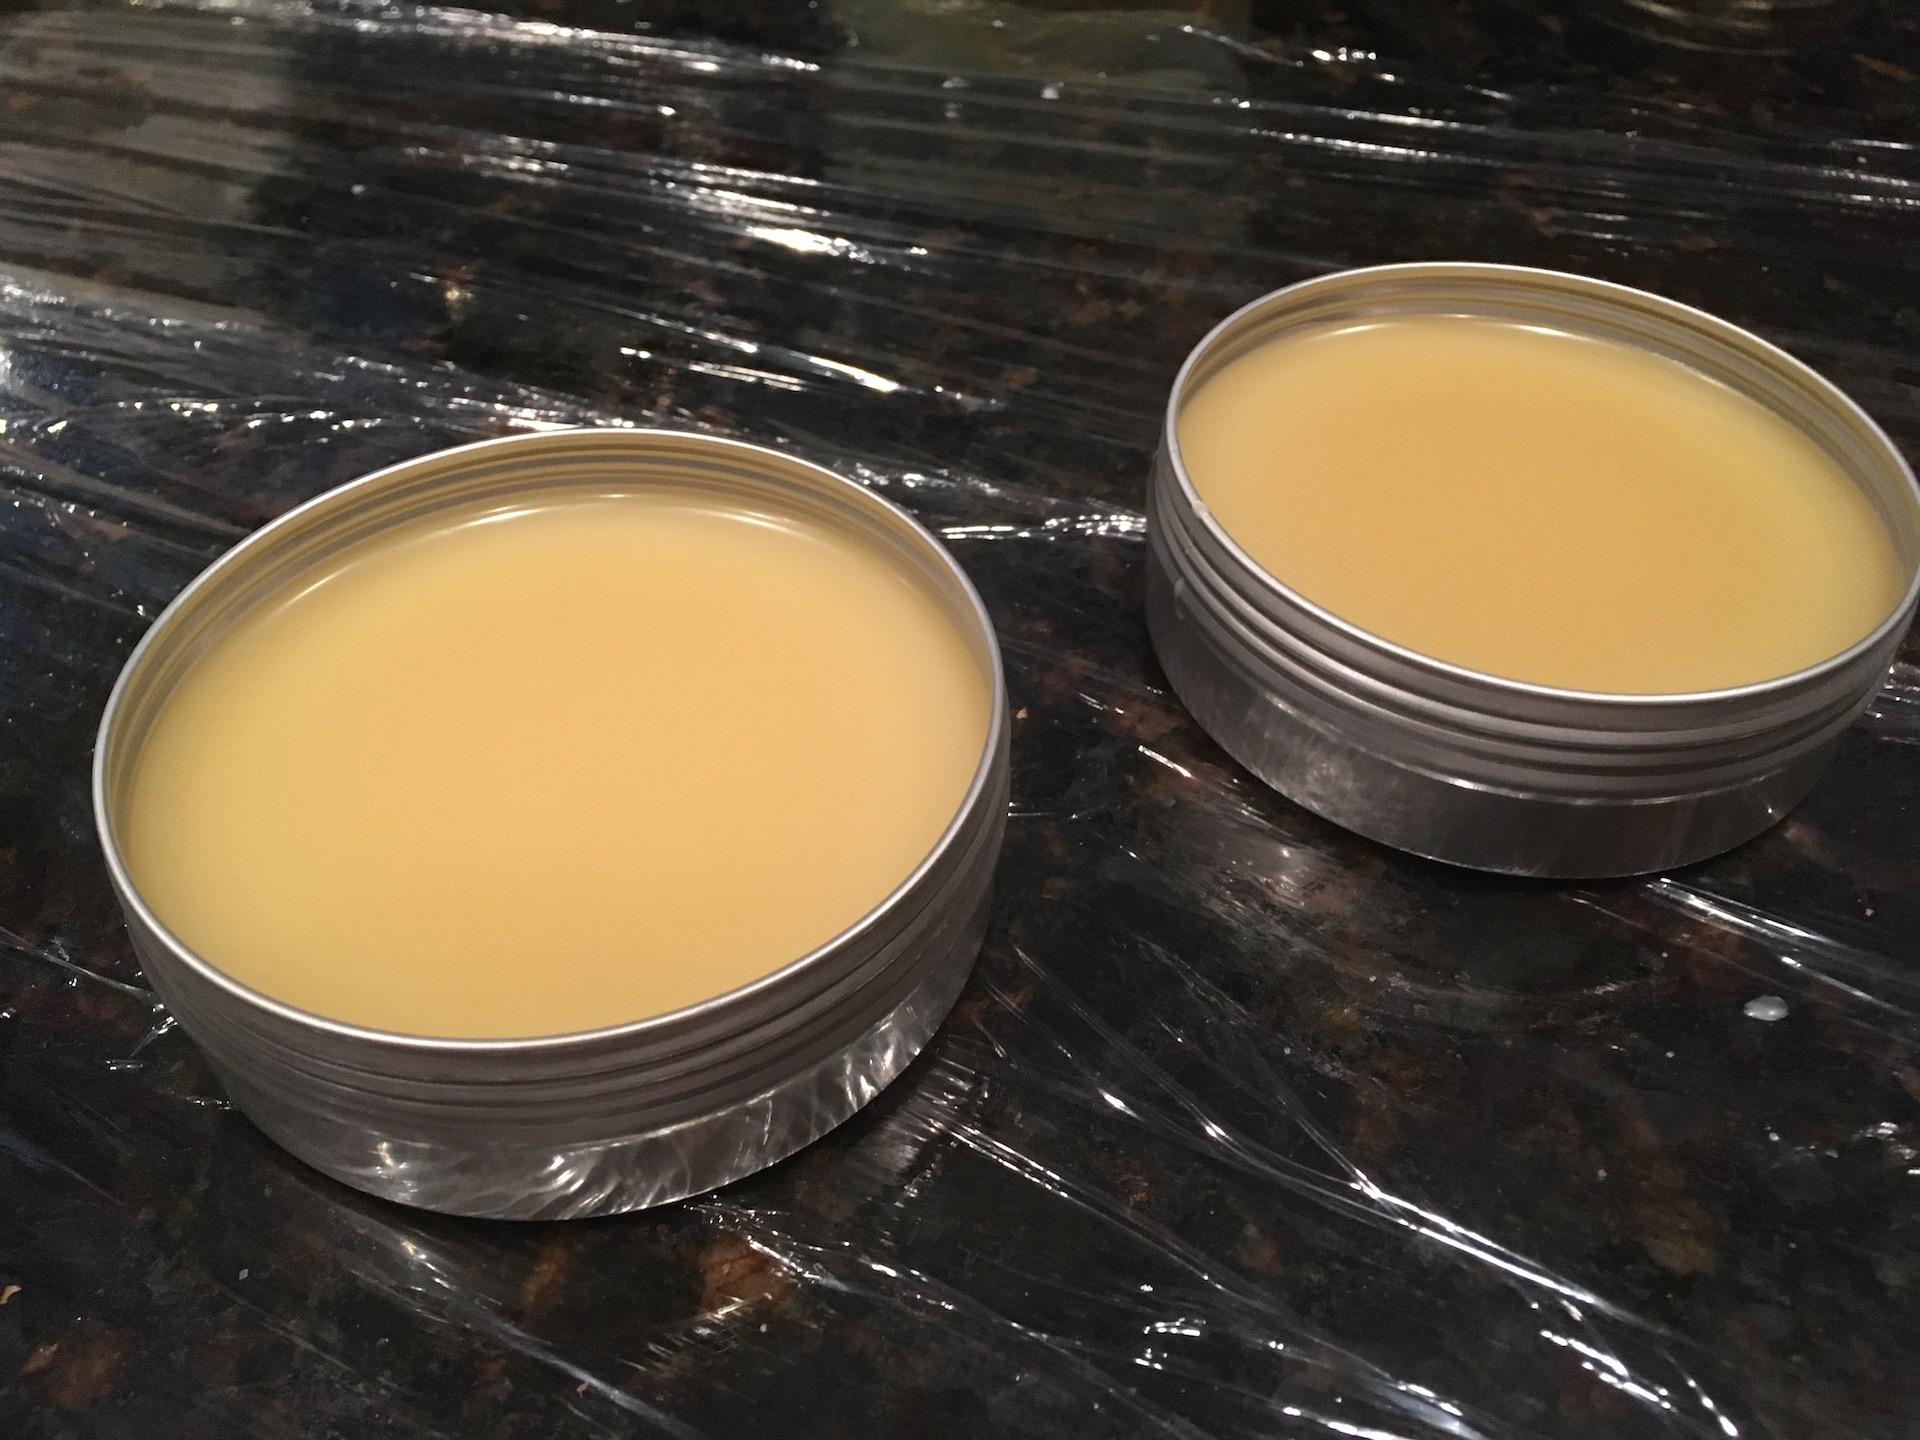 How To Make DIY Beeswax Leather Conditioner Balm - Misfit Gardening